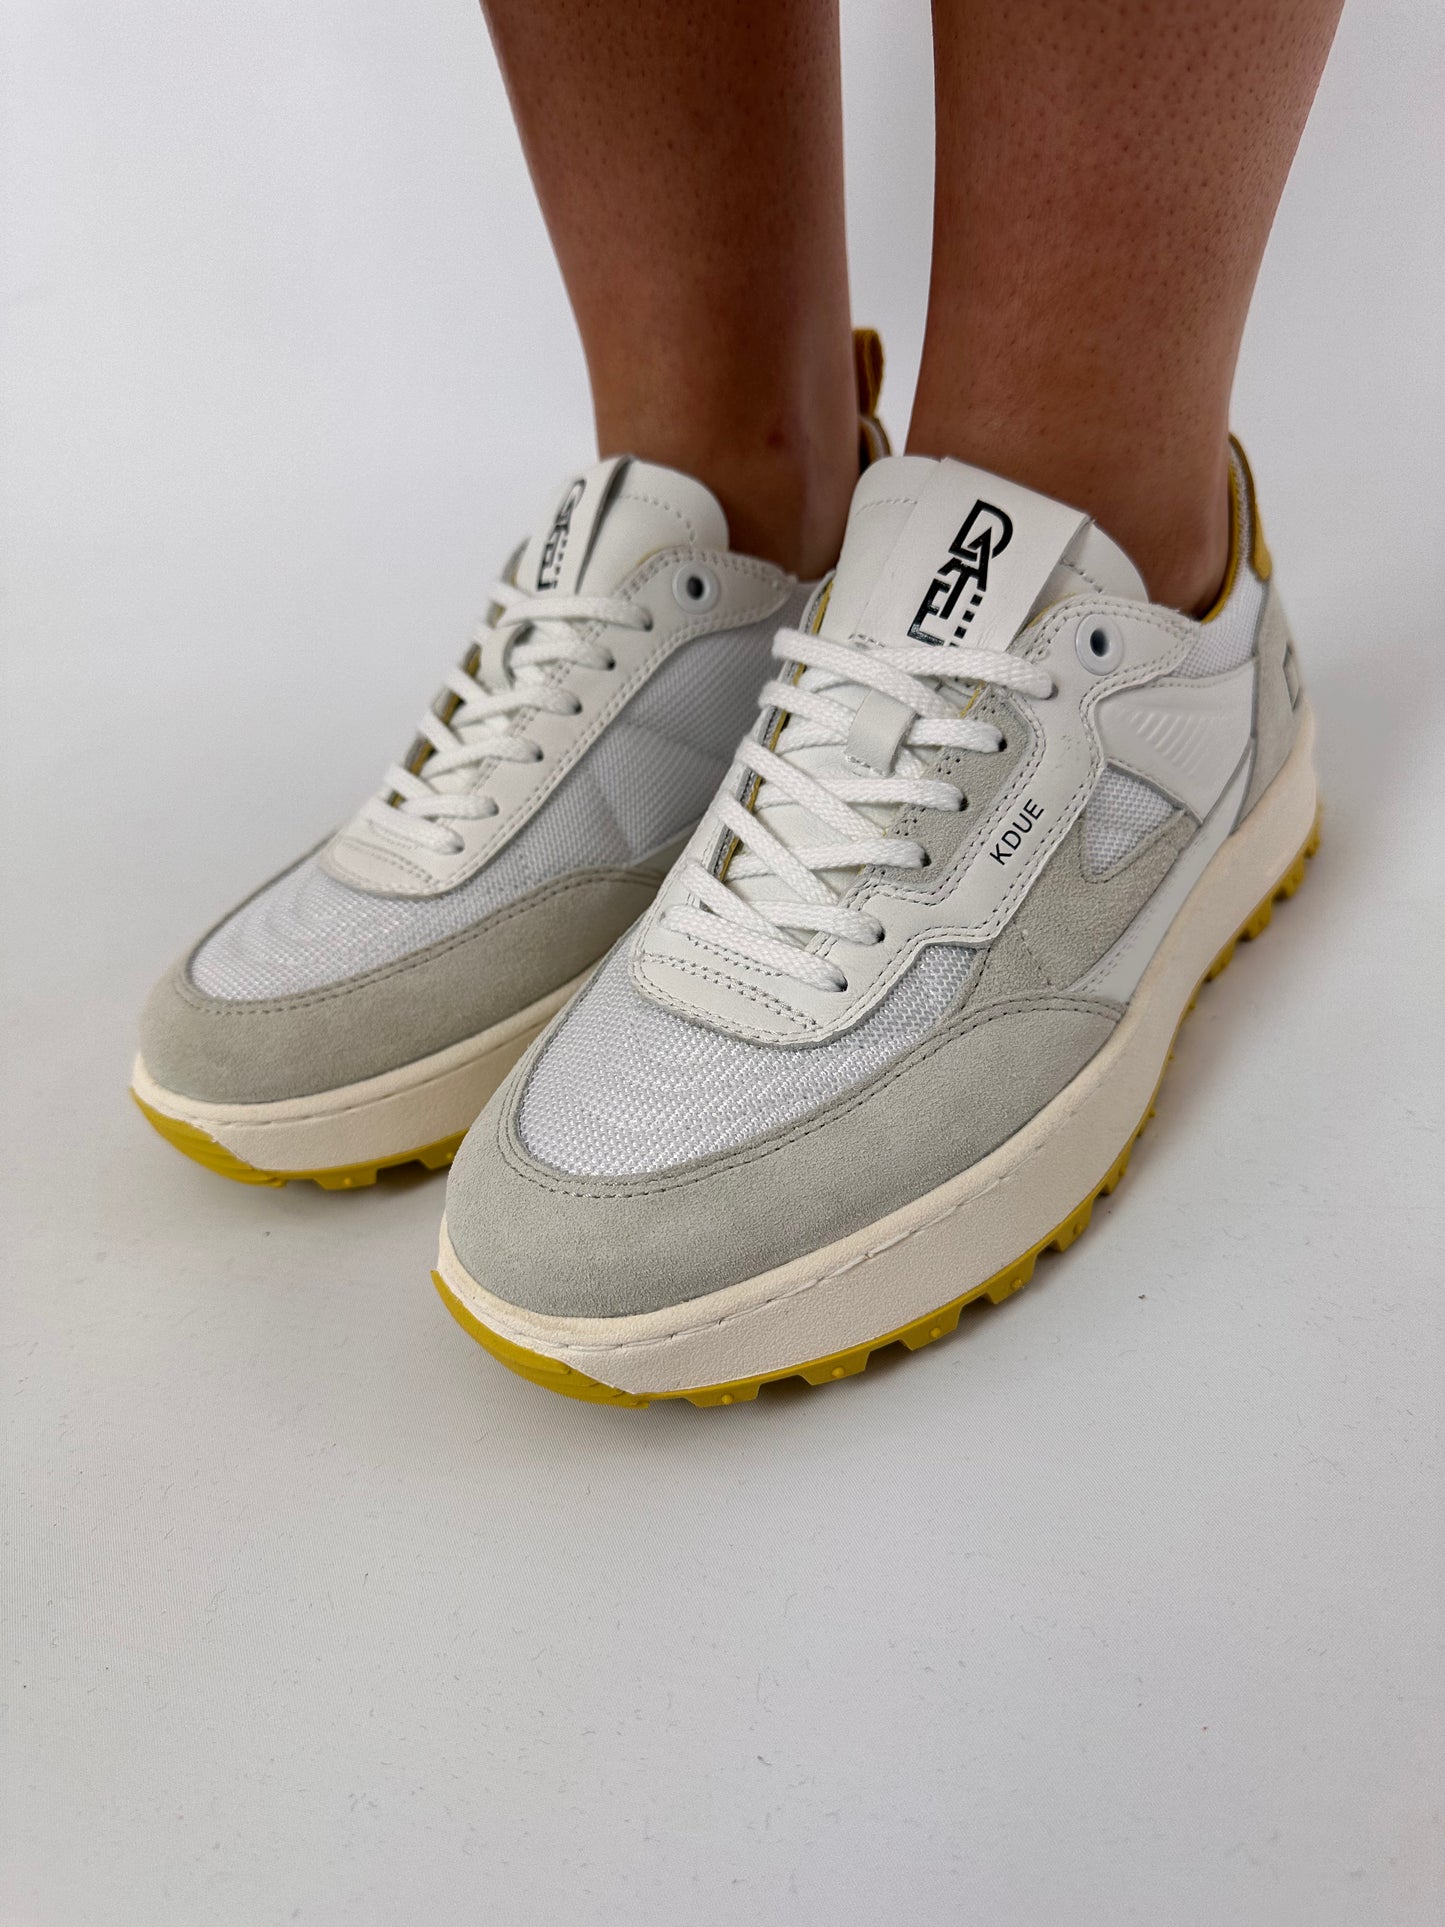 DATE Kdue Trainers White/Yellow